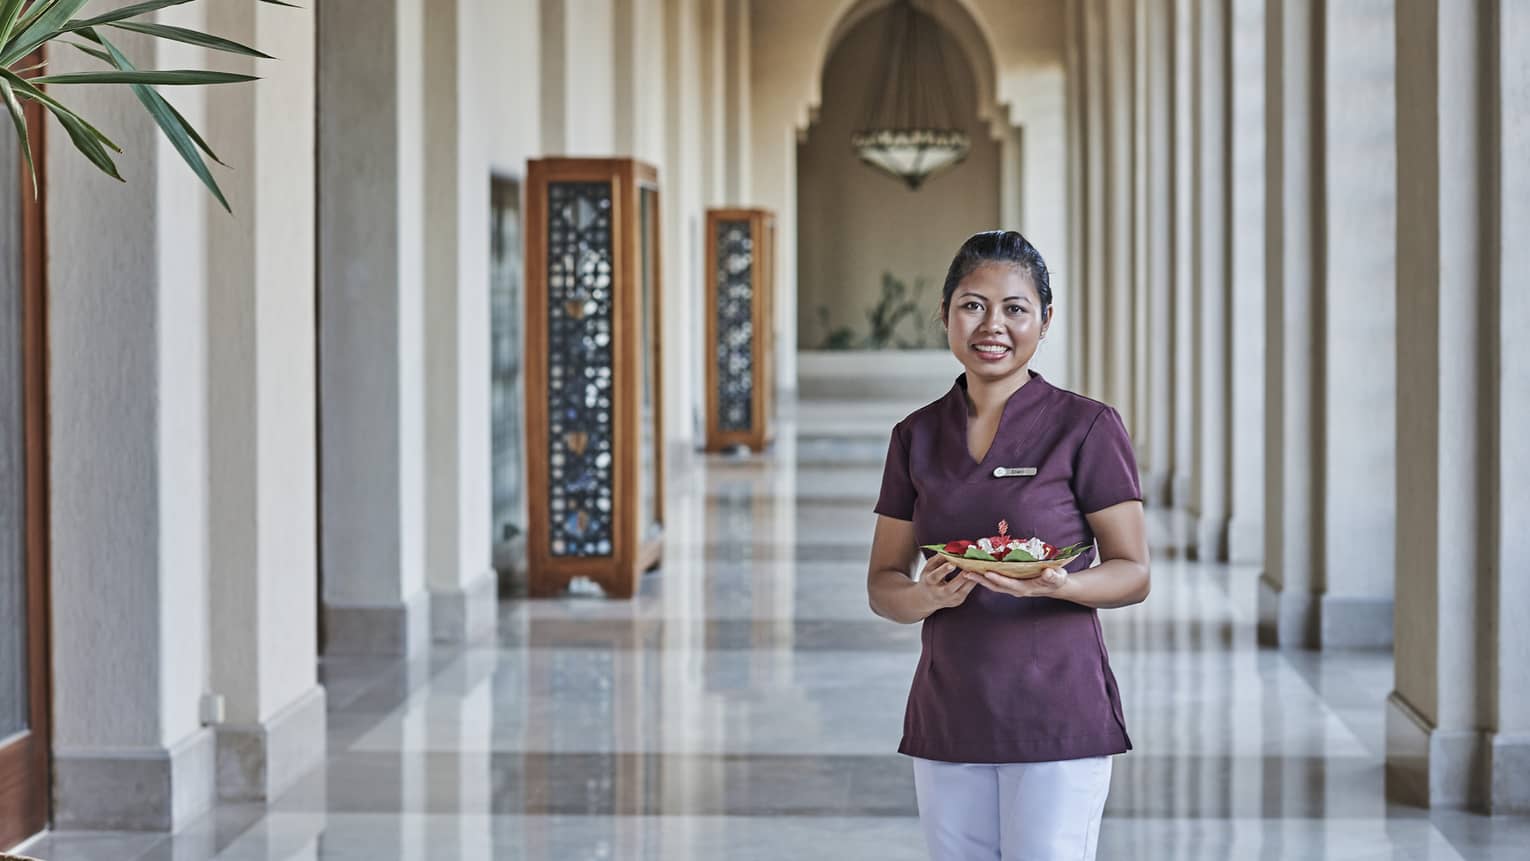 Smiling spa staff member standing in high-ceilinged hallway filled with natural light